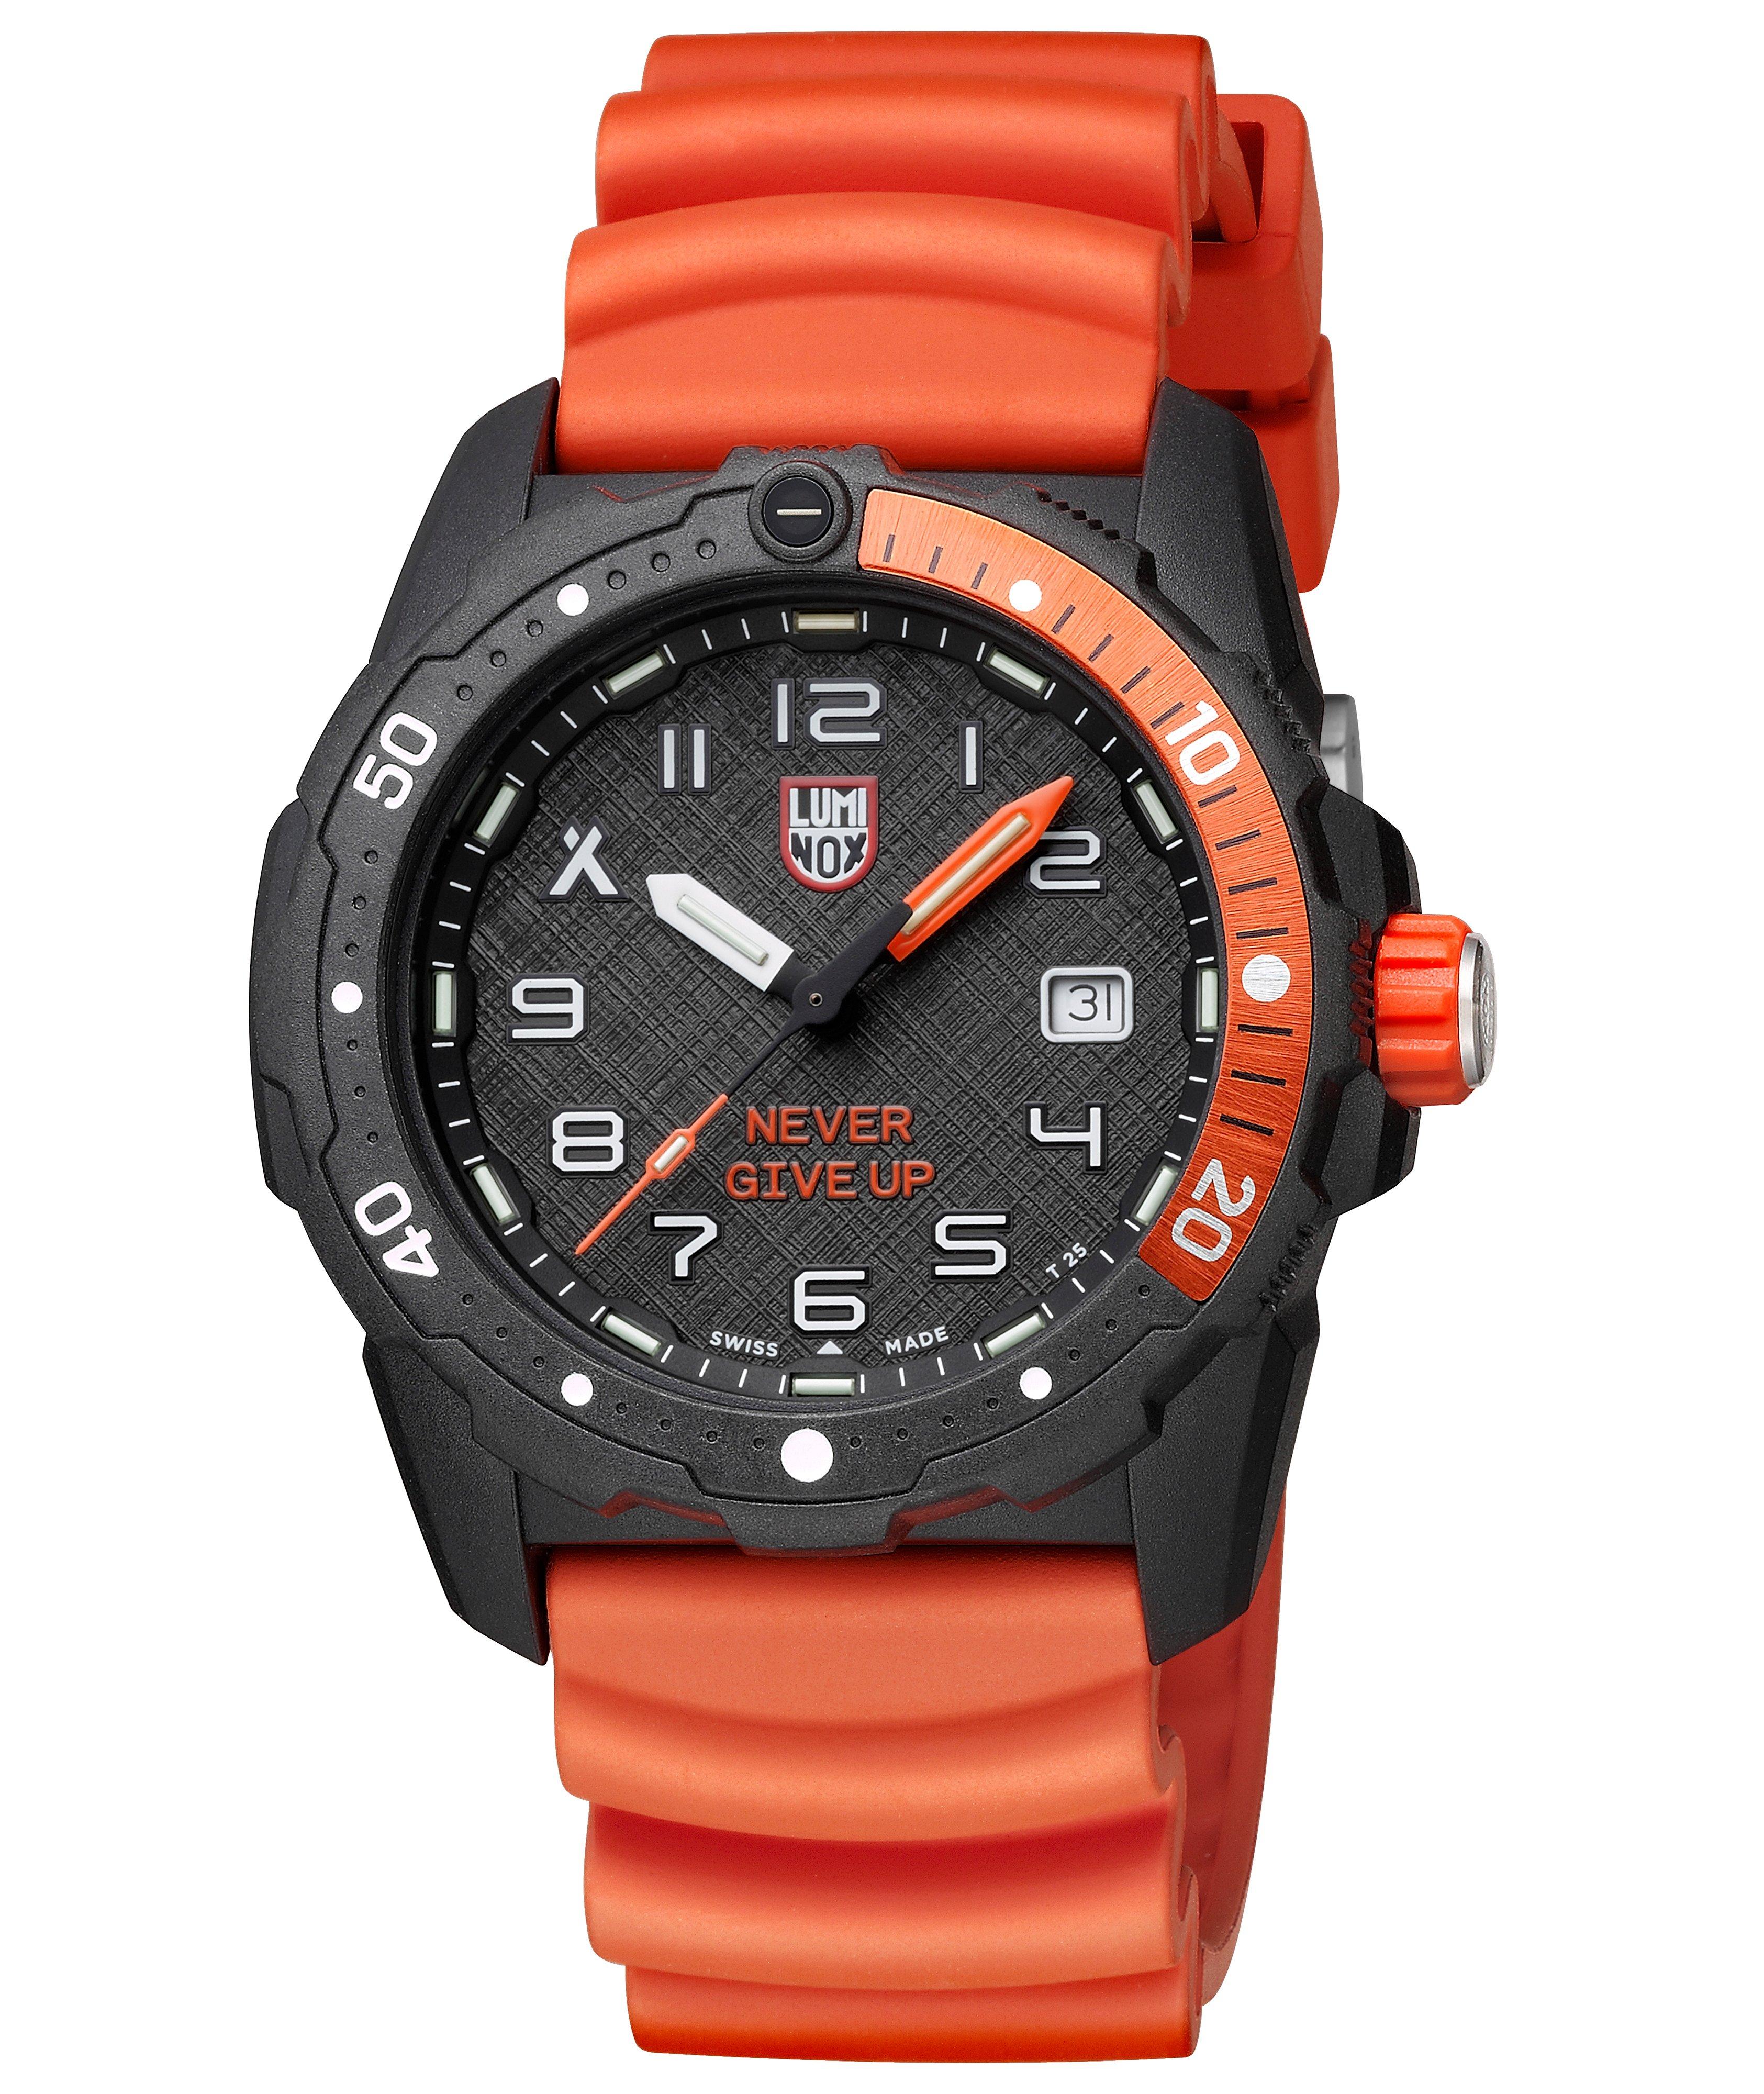 Bear Grylls 3729 Never Give Up Watch image 1